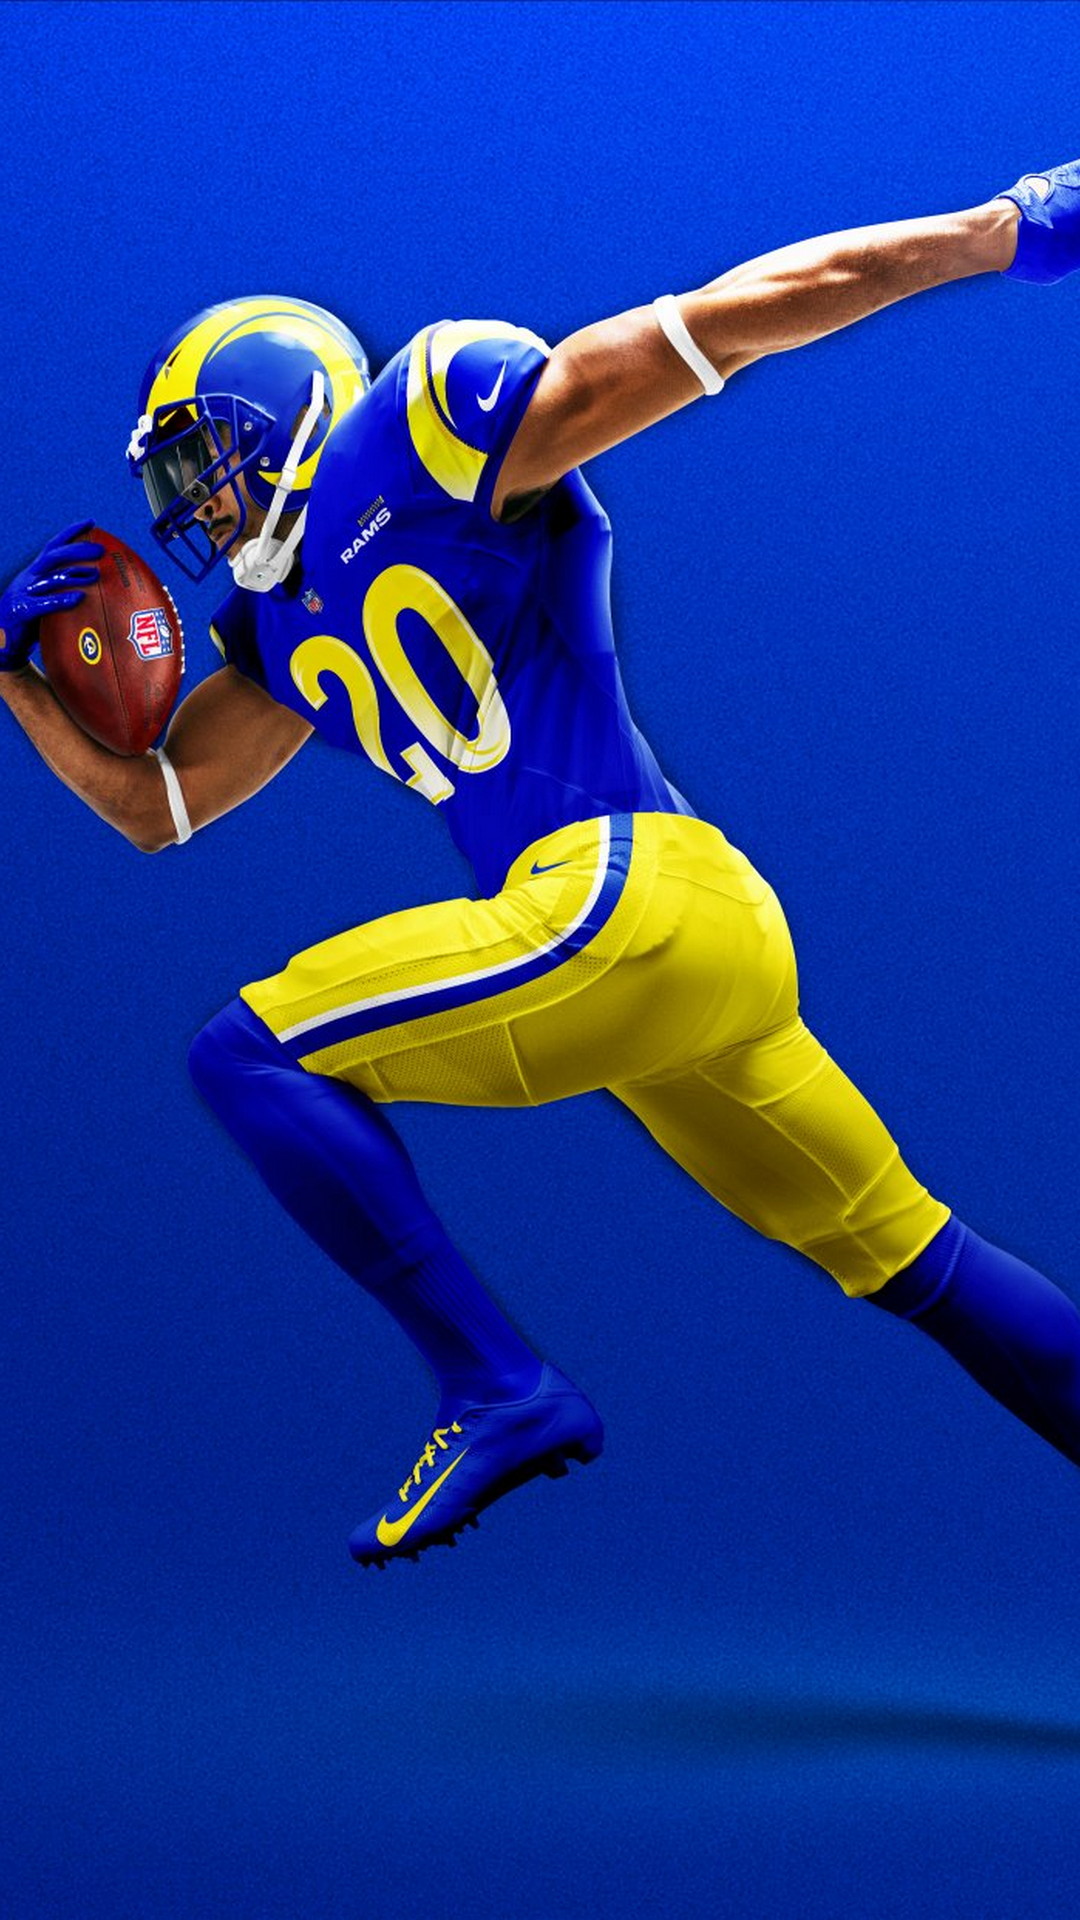 Los Angeles Rams iPhone 11 Wallpaper with high-resolution 1080x1920 pixel. Download and set as wallpaper for Desktop Computer, Apple iPhone X, XS Max, XR, 8, 7, 6, SE, iPad, Android